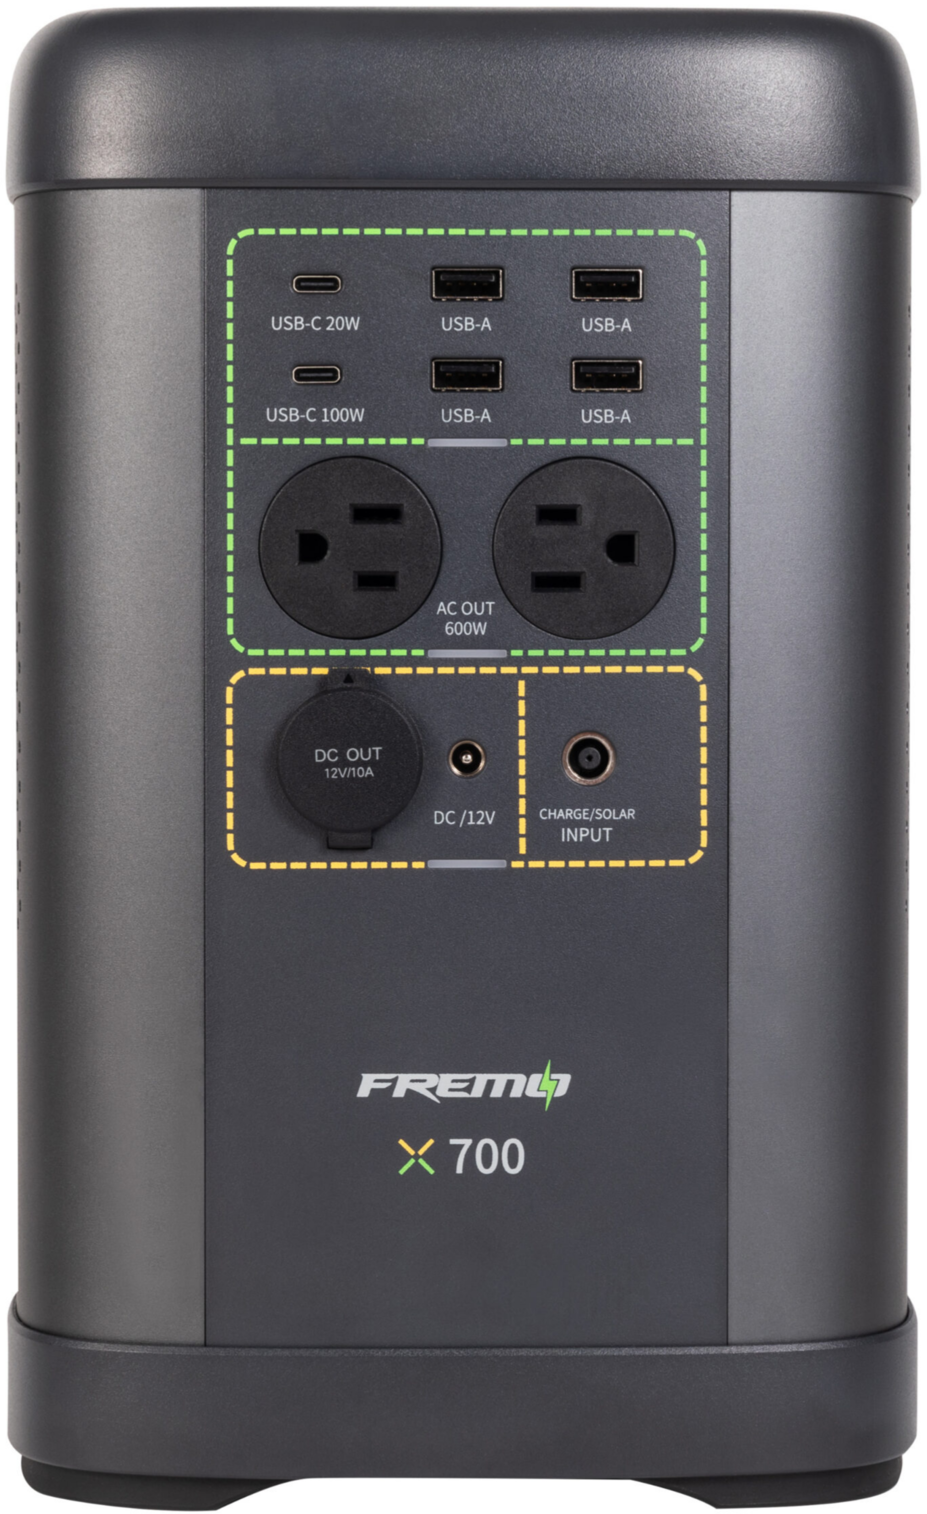 Fremo portable power station x700 662wh LFP battery for $450